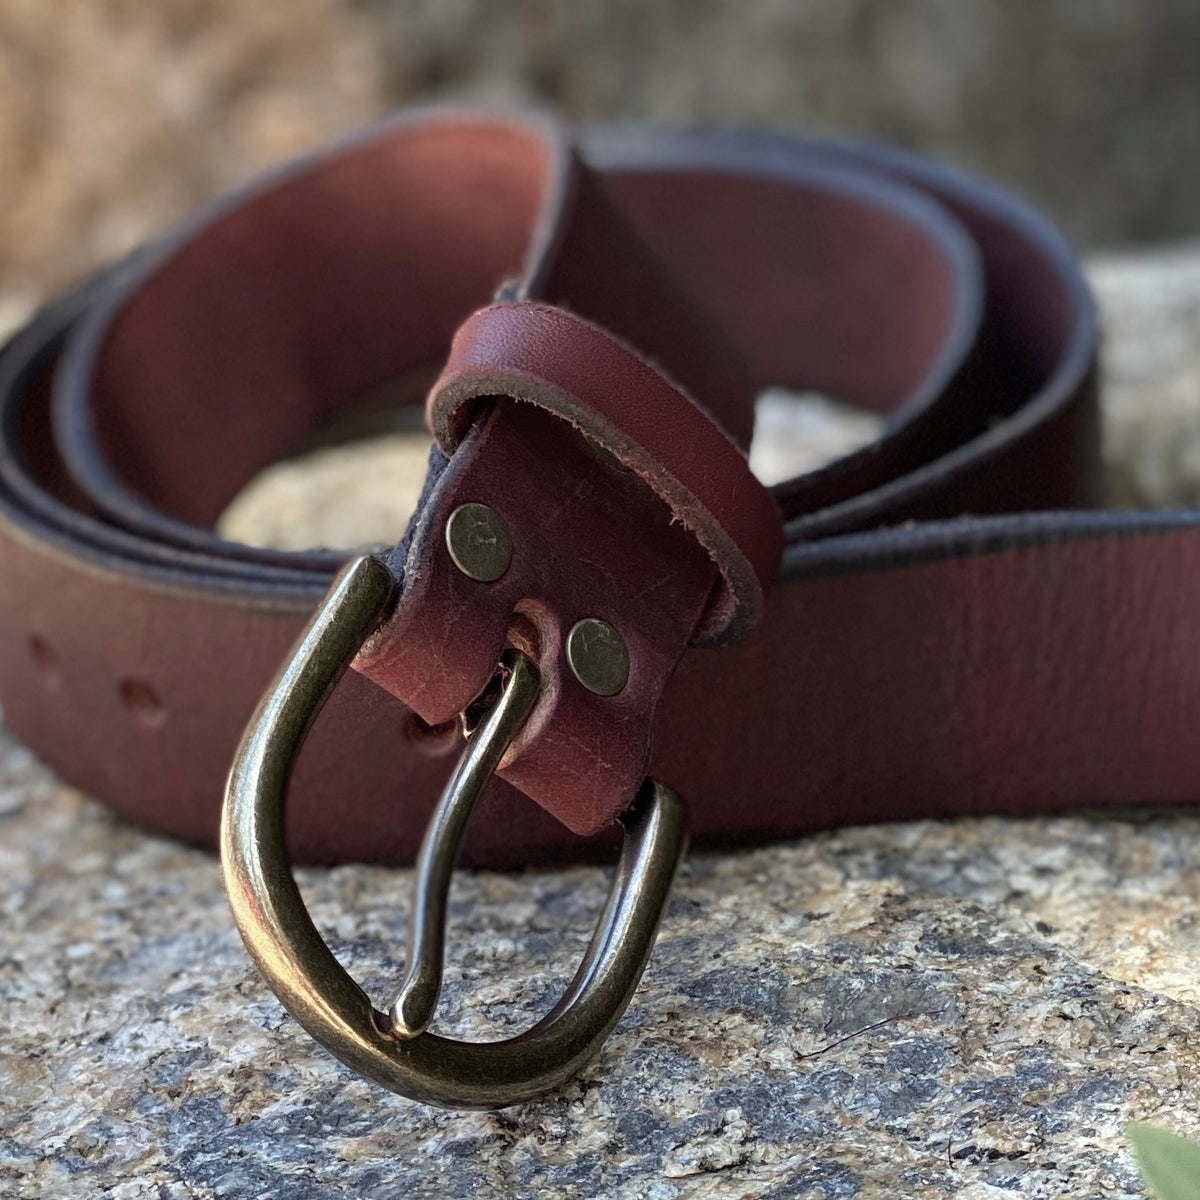 Classic Leather Belt in Cognac | Made in The USA | Tanner Goods Brass / 30